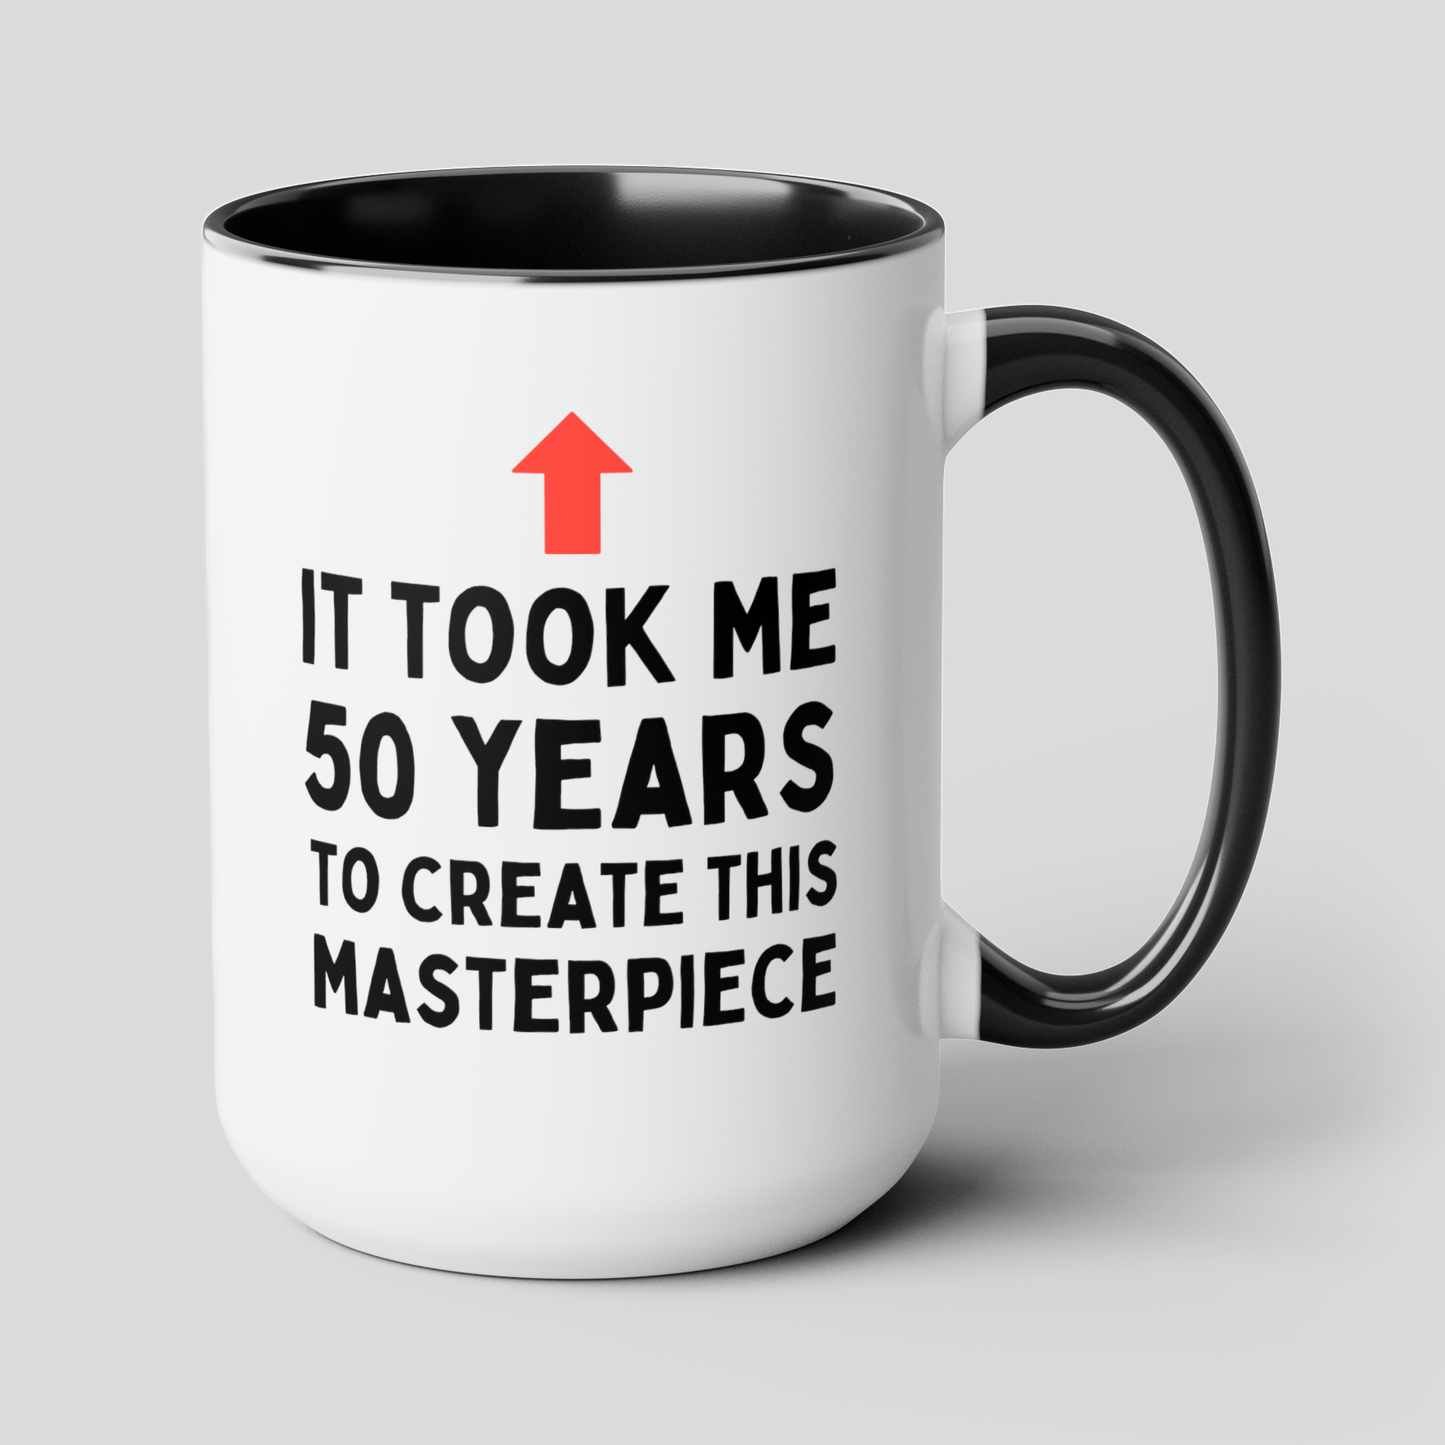 It Took Me 50 Years To Create This Masterpiece 11oz white with black accent funny large coffee mug gift for birthday custom date waveywares wavey wares wavywares wavy wares cover